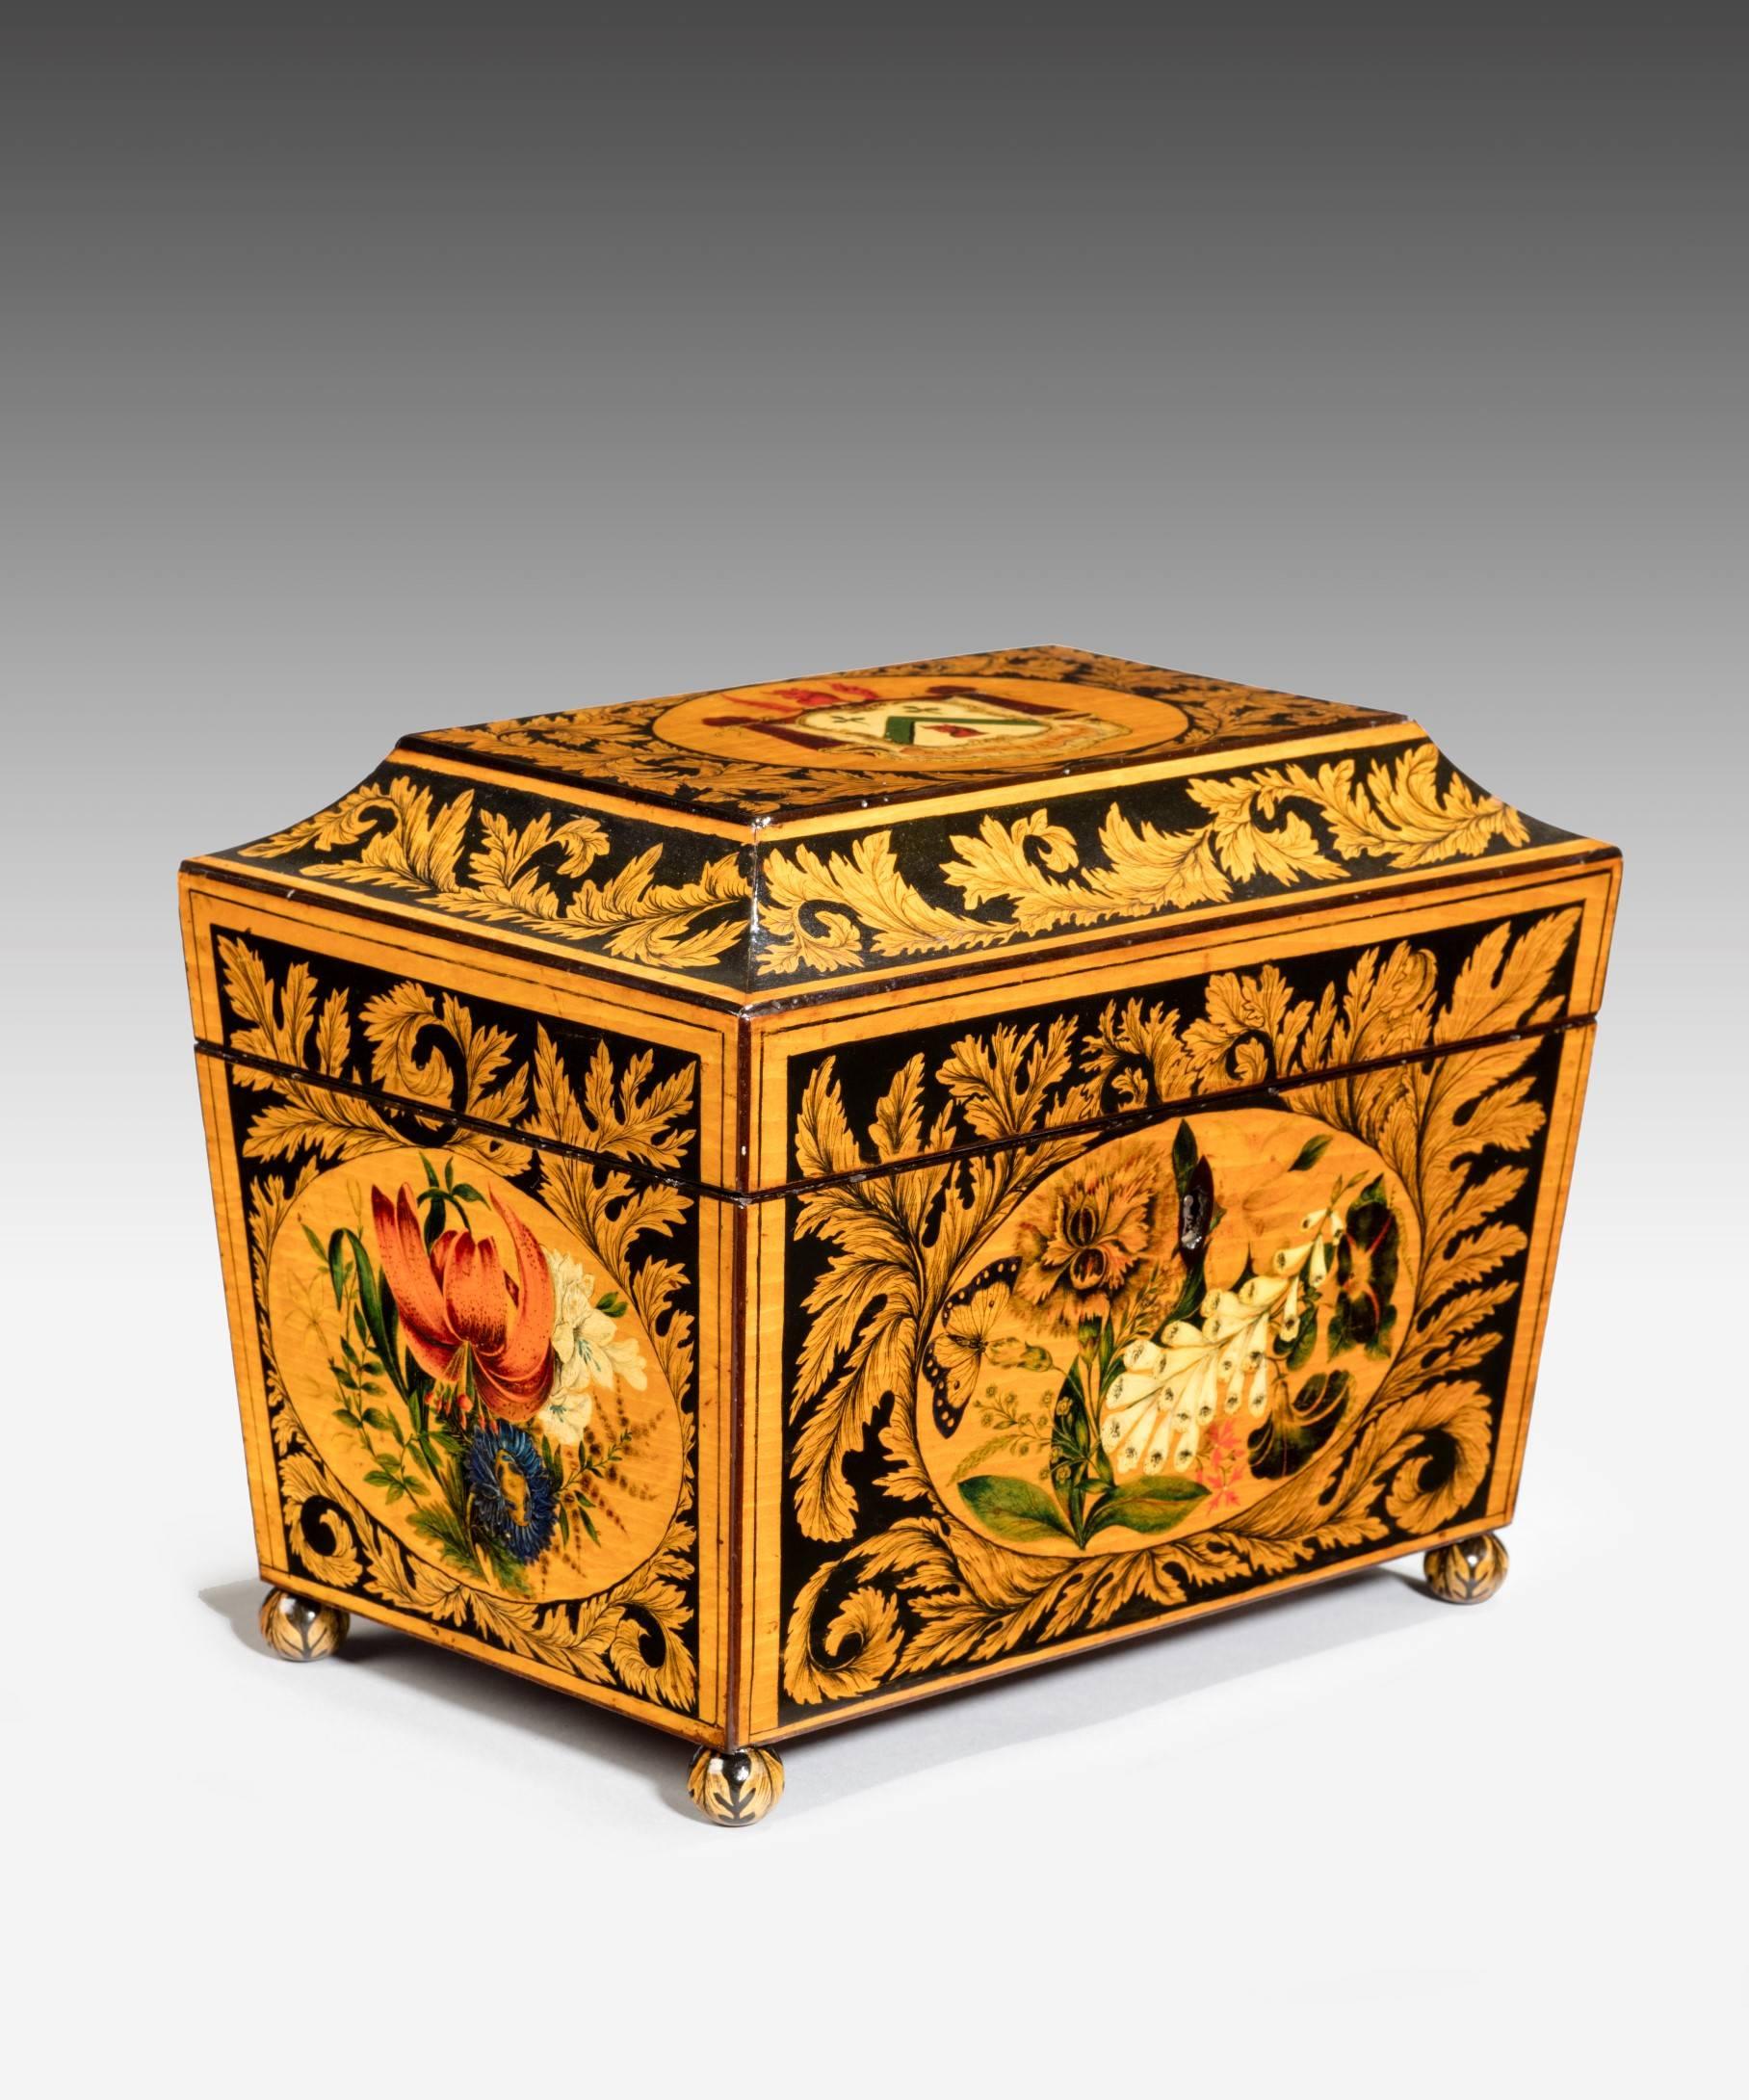 Painted Regency Tea Caddy Decorated with Penwork